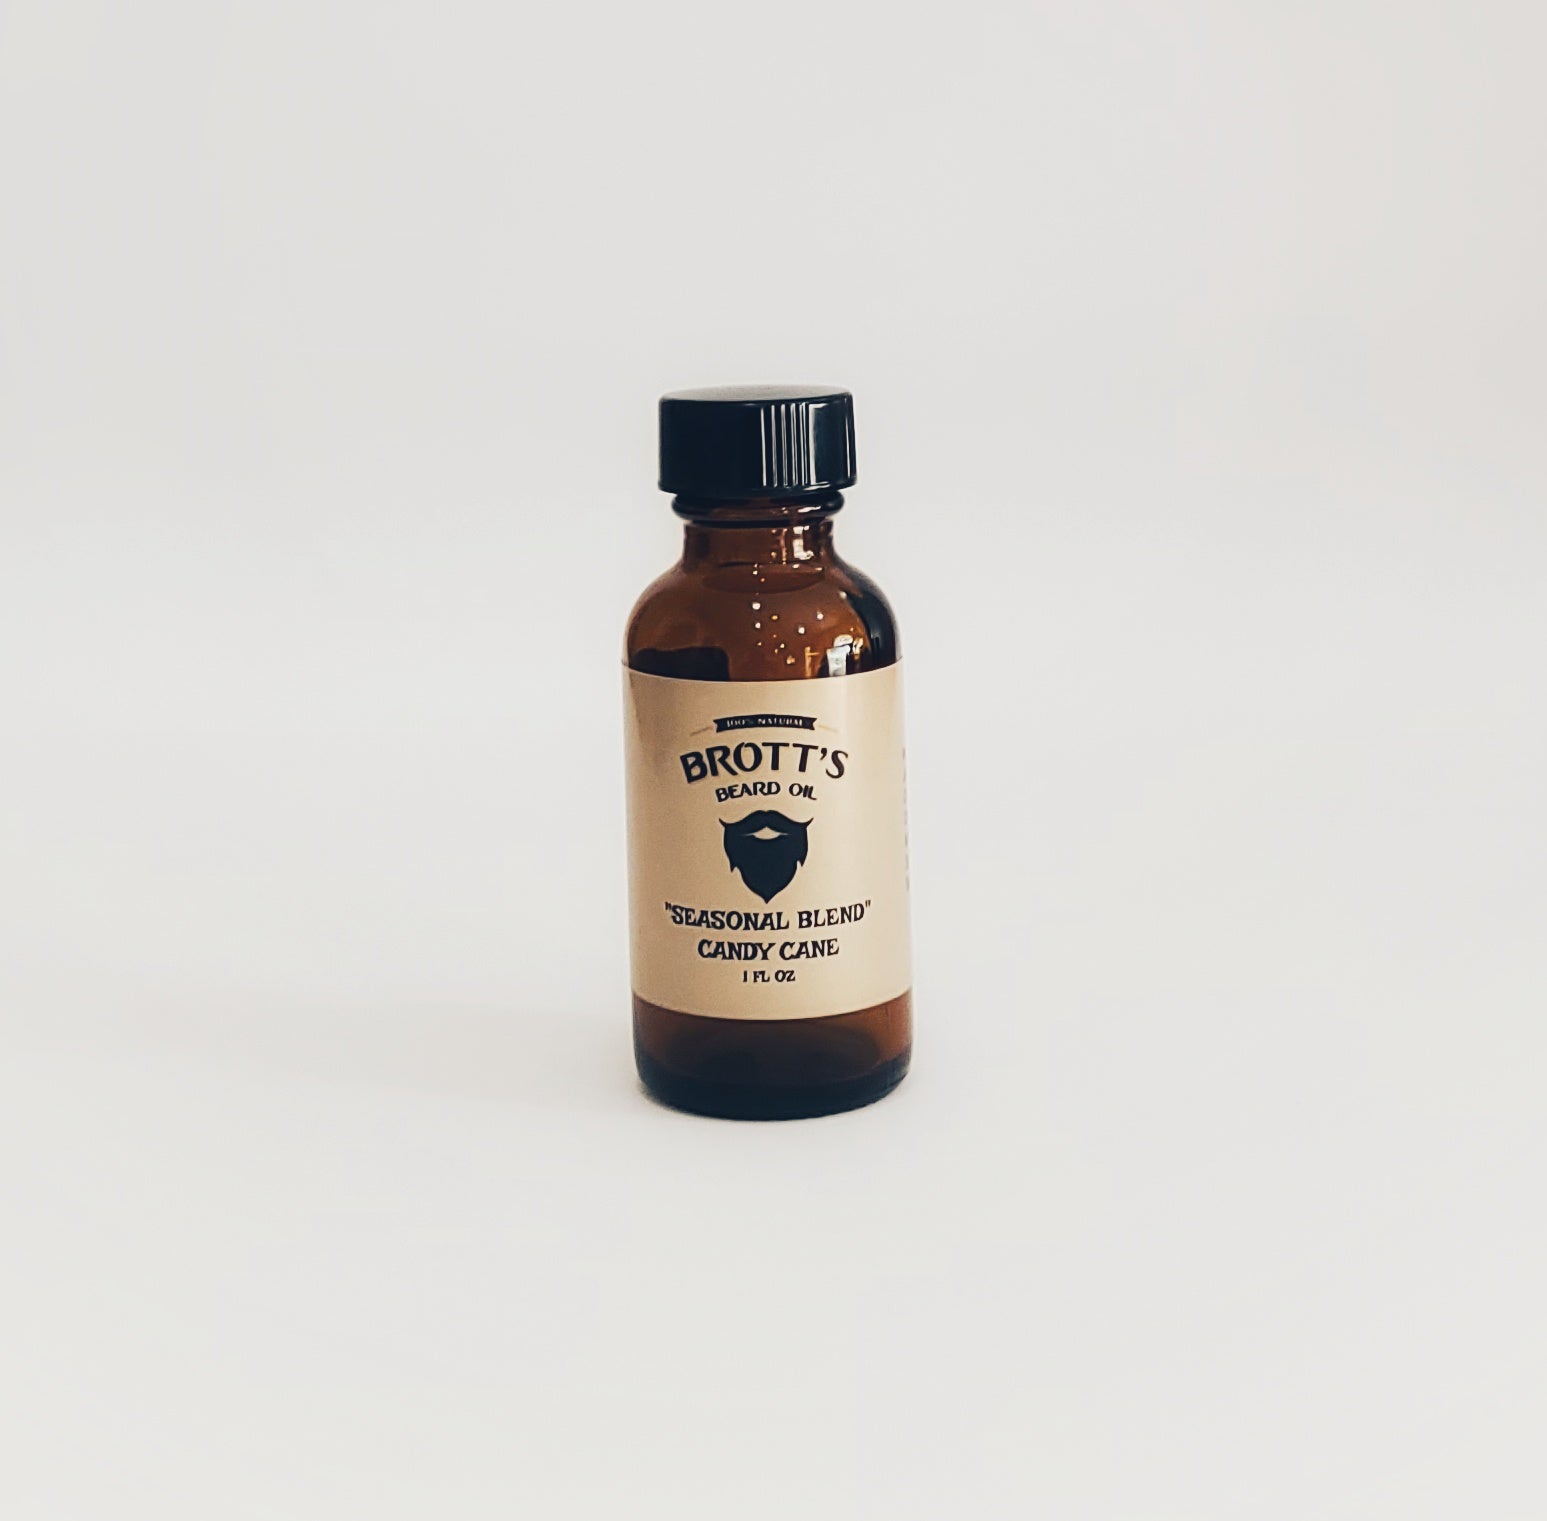 Candy cane scented beard oil 1 ounce bottle